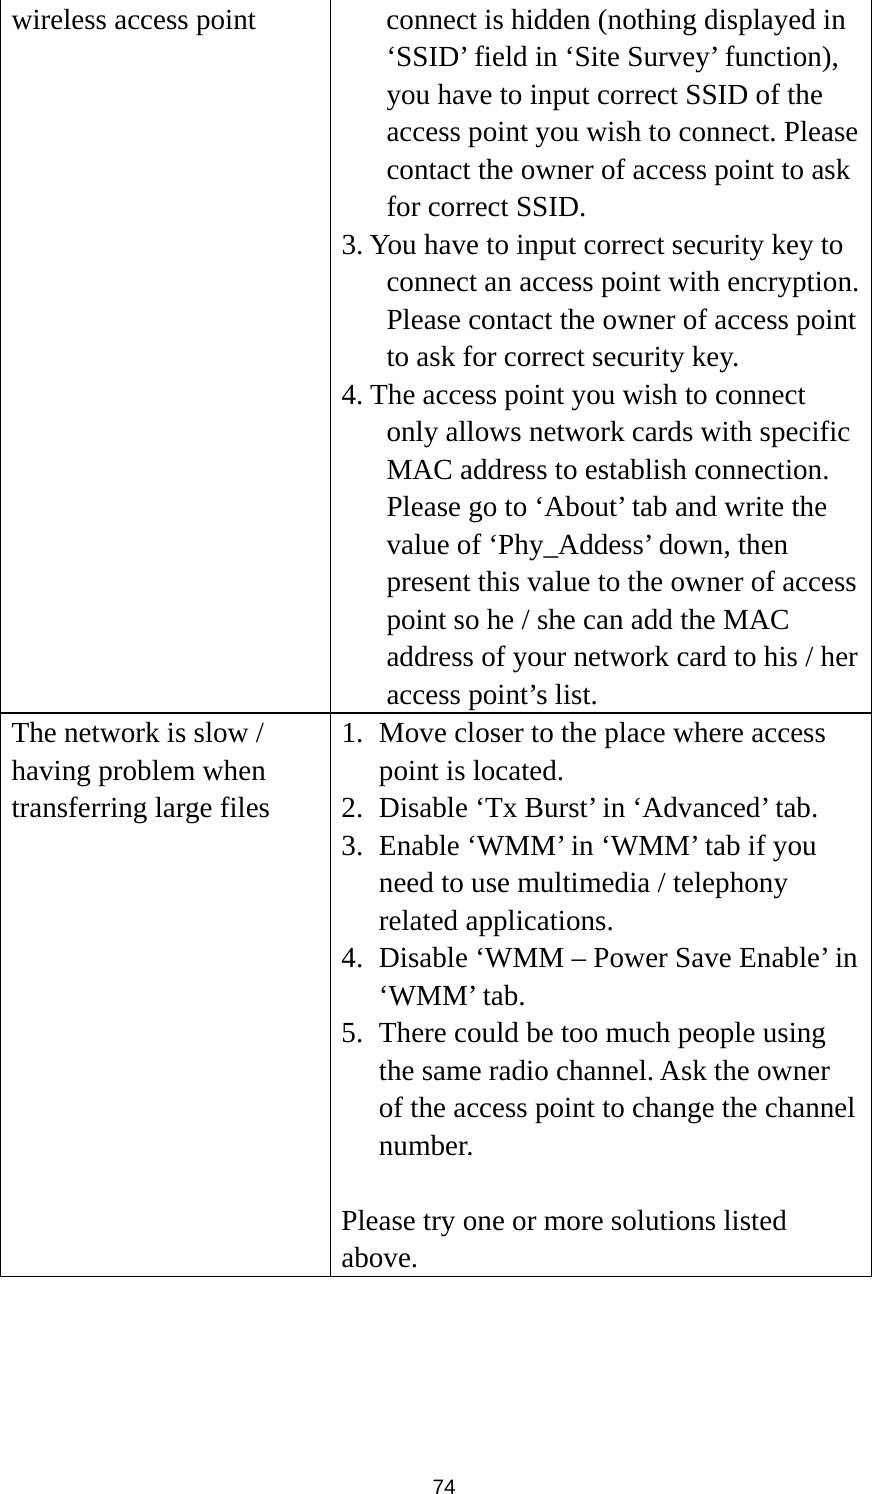  74 wireless access point  connect is hidden (nothing displayed in ‘SSID’ field in ‘Site Survey’ function), you have to input correct SSID of the access point you wish to connect. Please contact the owner of access point to ask for correct SSID. 3. You have to input correct security key to connect an access point with encryption. Please contact the owner of access point to ask for correct security key. 4. The access point you wish to connect only allows network cards with specific MAC address to establish connection. Please go to ‘About’ tab and write the value of ‘Phy_Addess’ down, then present this value to the owner of access point so he / she can add the MAC address of your network card to his / her access point’s list. The network is slow / having problem when transferring large files 1. Move closer to the place where access point is located. 2. Disable ‘Tx Burst’ in ‘Advanced’ tab. 3. Enable ‘WMM’ in ‘WMM’ tab if you need to use multimedia / telephony related applications. 4. Disable ‘WMM – Power Save Enable’ in ‘WMM’ tab. 5. There could be too much people using the same radio channel. Ask the owner of the access point to change the channel number.  Please try one or more solutions listed above.     